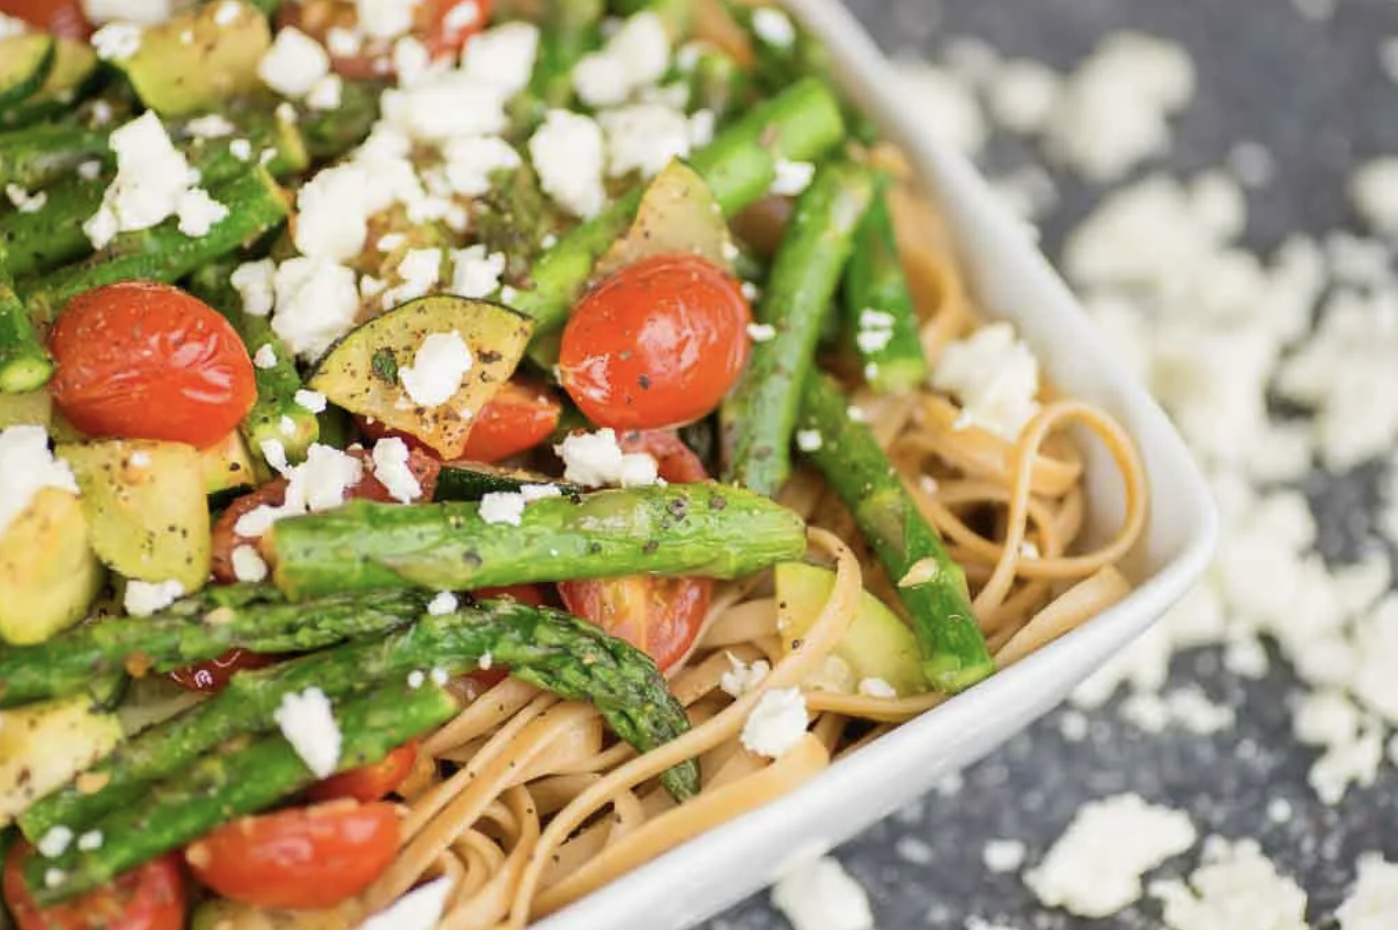 Eat Local and In Season with Tomato and Asparagus Pasta